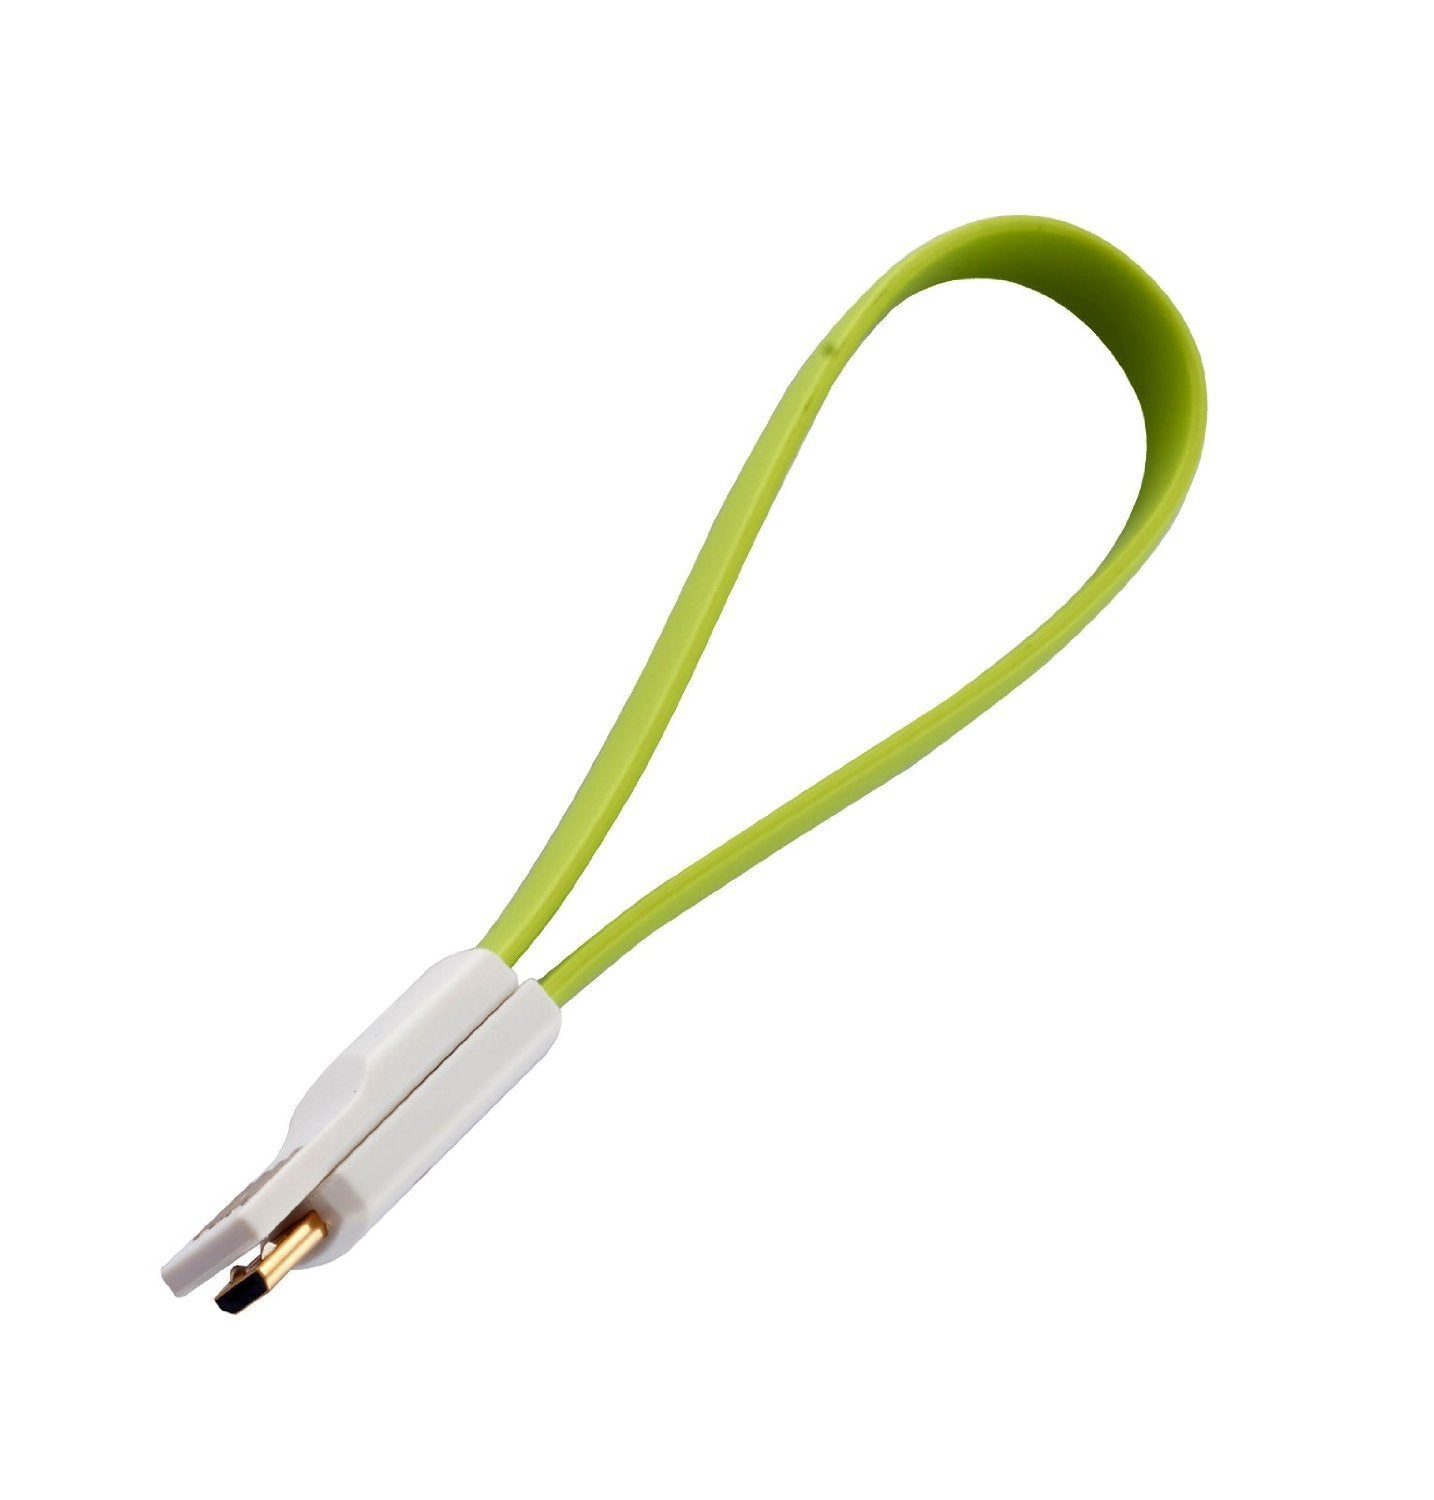 IBRA 0.2M Magnet Short and Compact Micro USB Charging/Sync Data Cable for for Samsung Galaxy S4 i9500 i9300 N7100 Nokia HTC Sony Xperia Series and all Mobilephones/Tablets/Cameras/Sat Nav -7.5Inch - Green